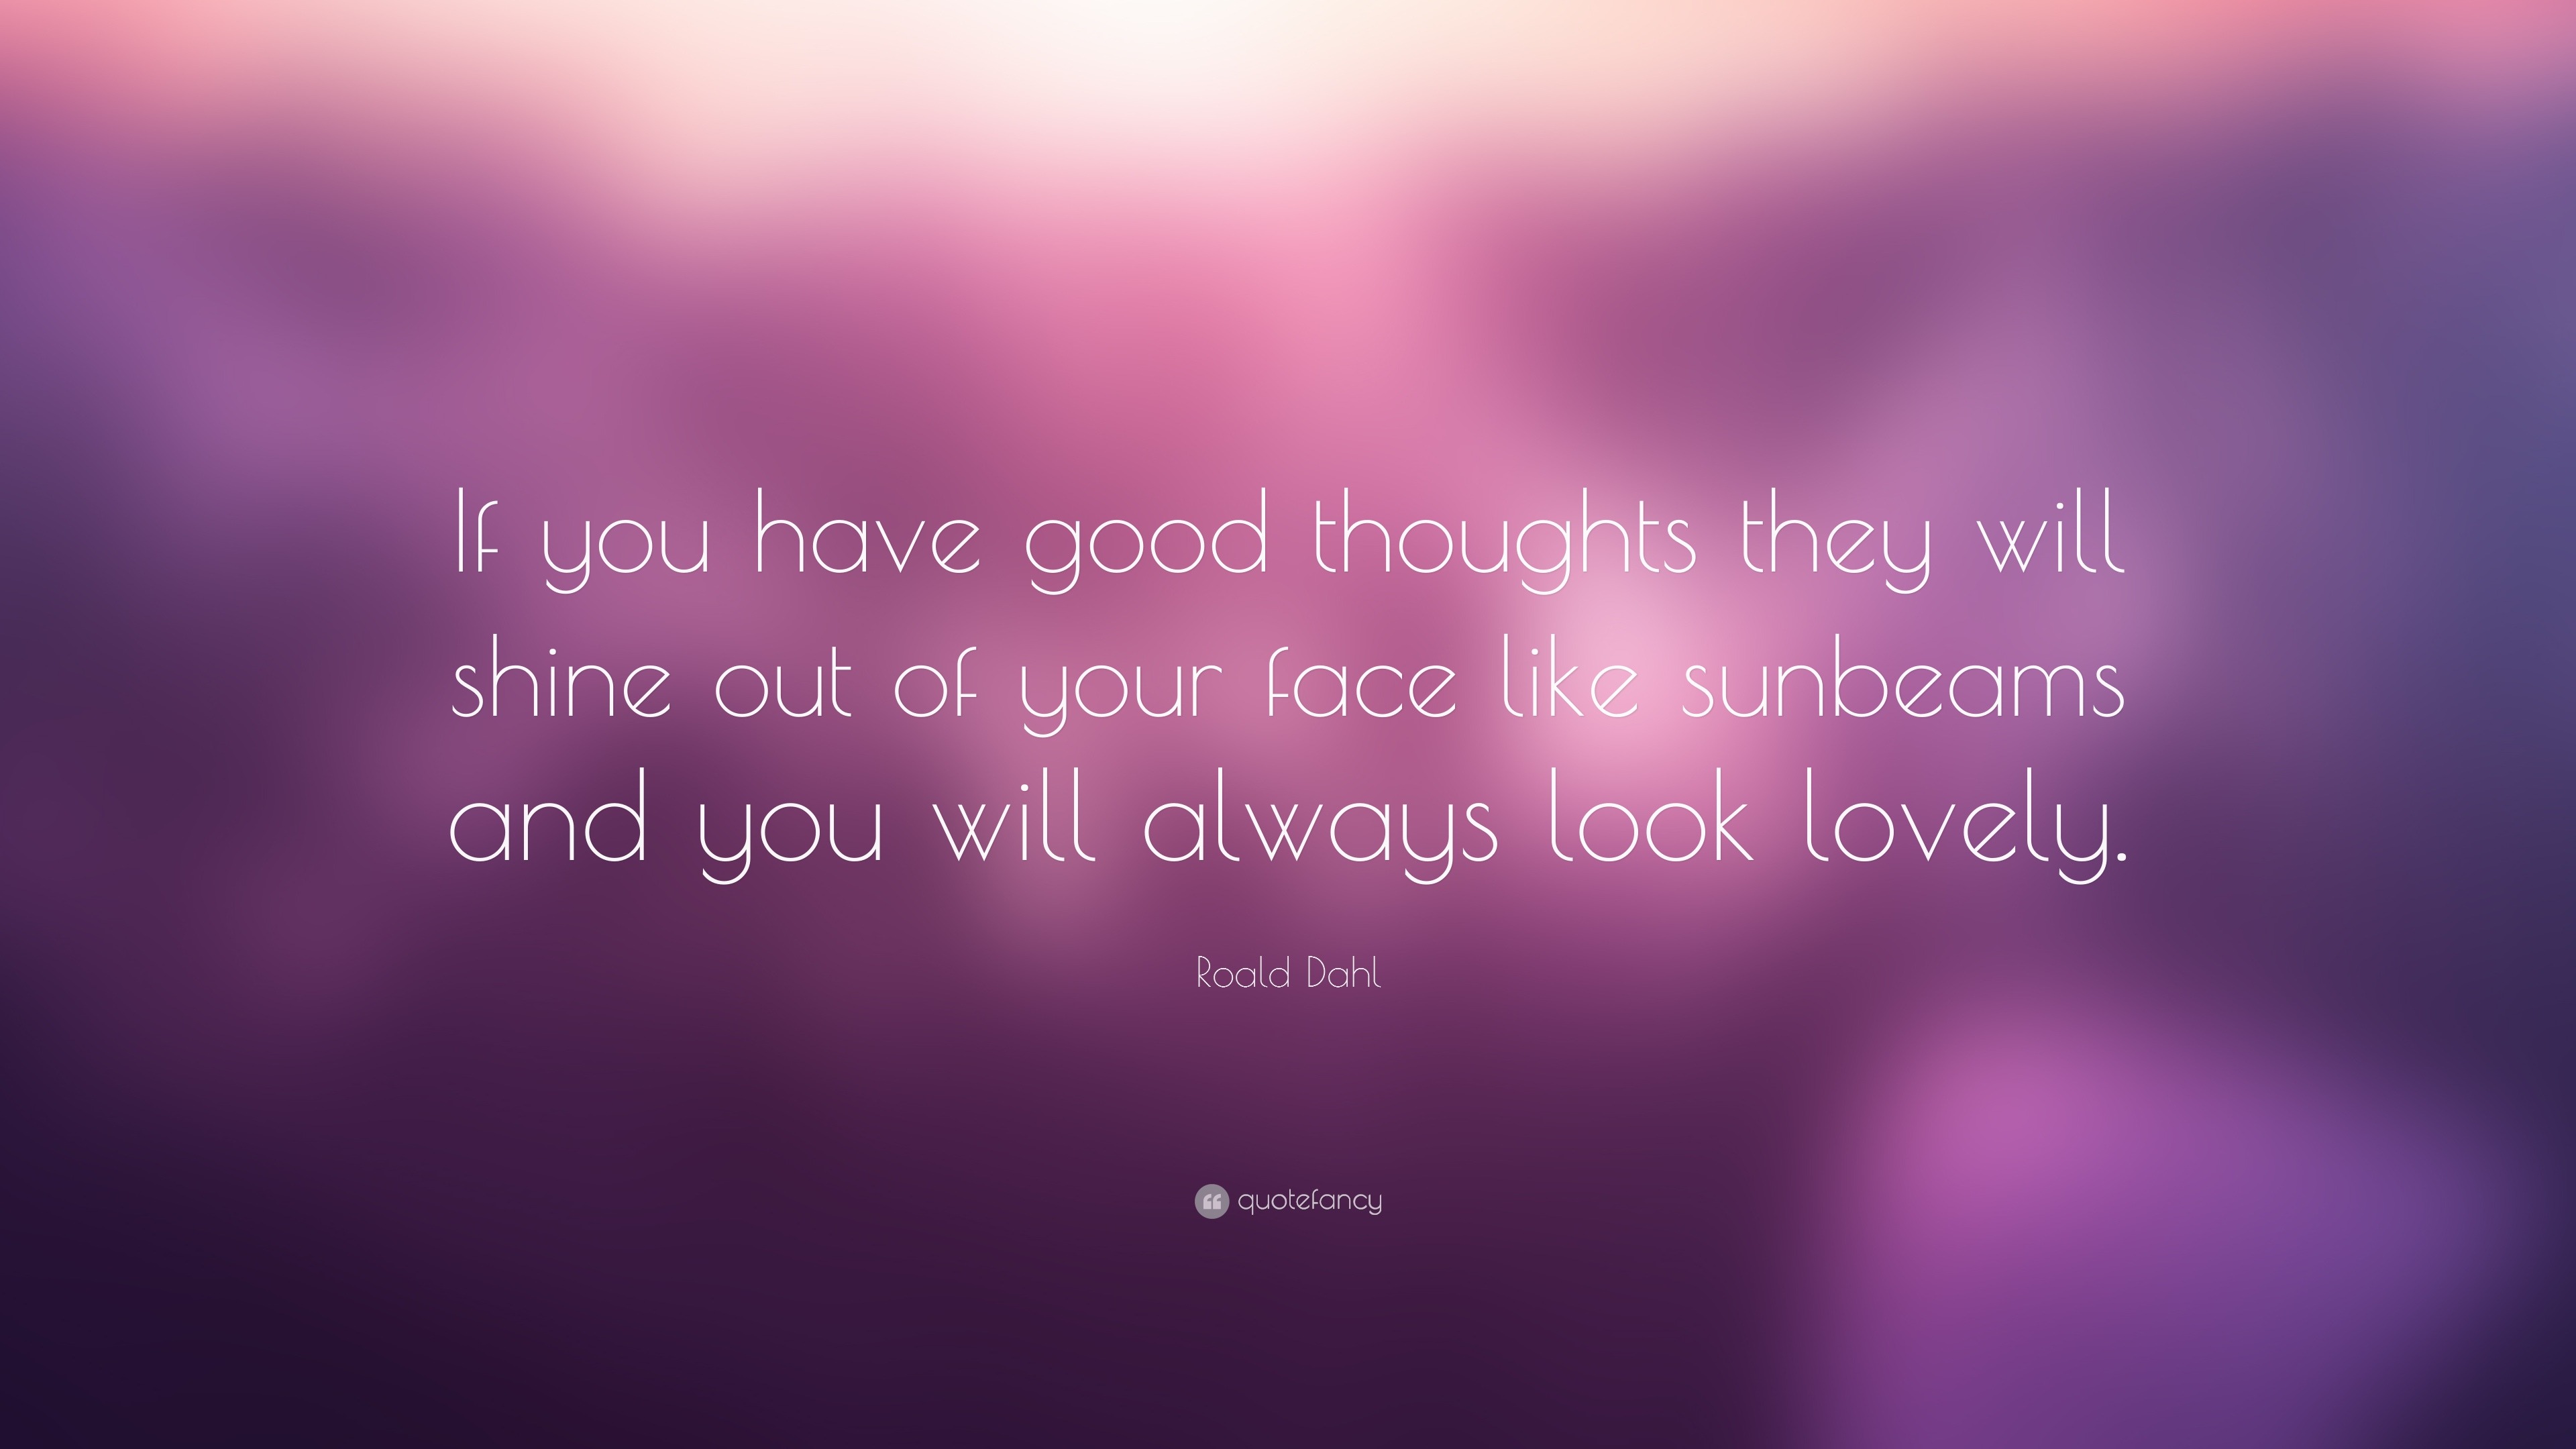 Roald Dahl Quote: “If you have good thoughts they will shine out of your  face like